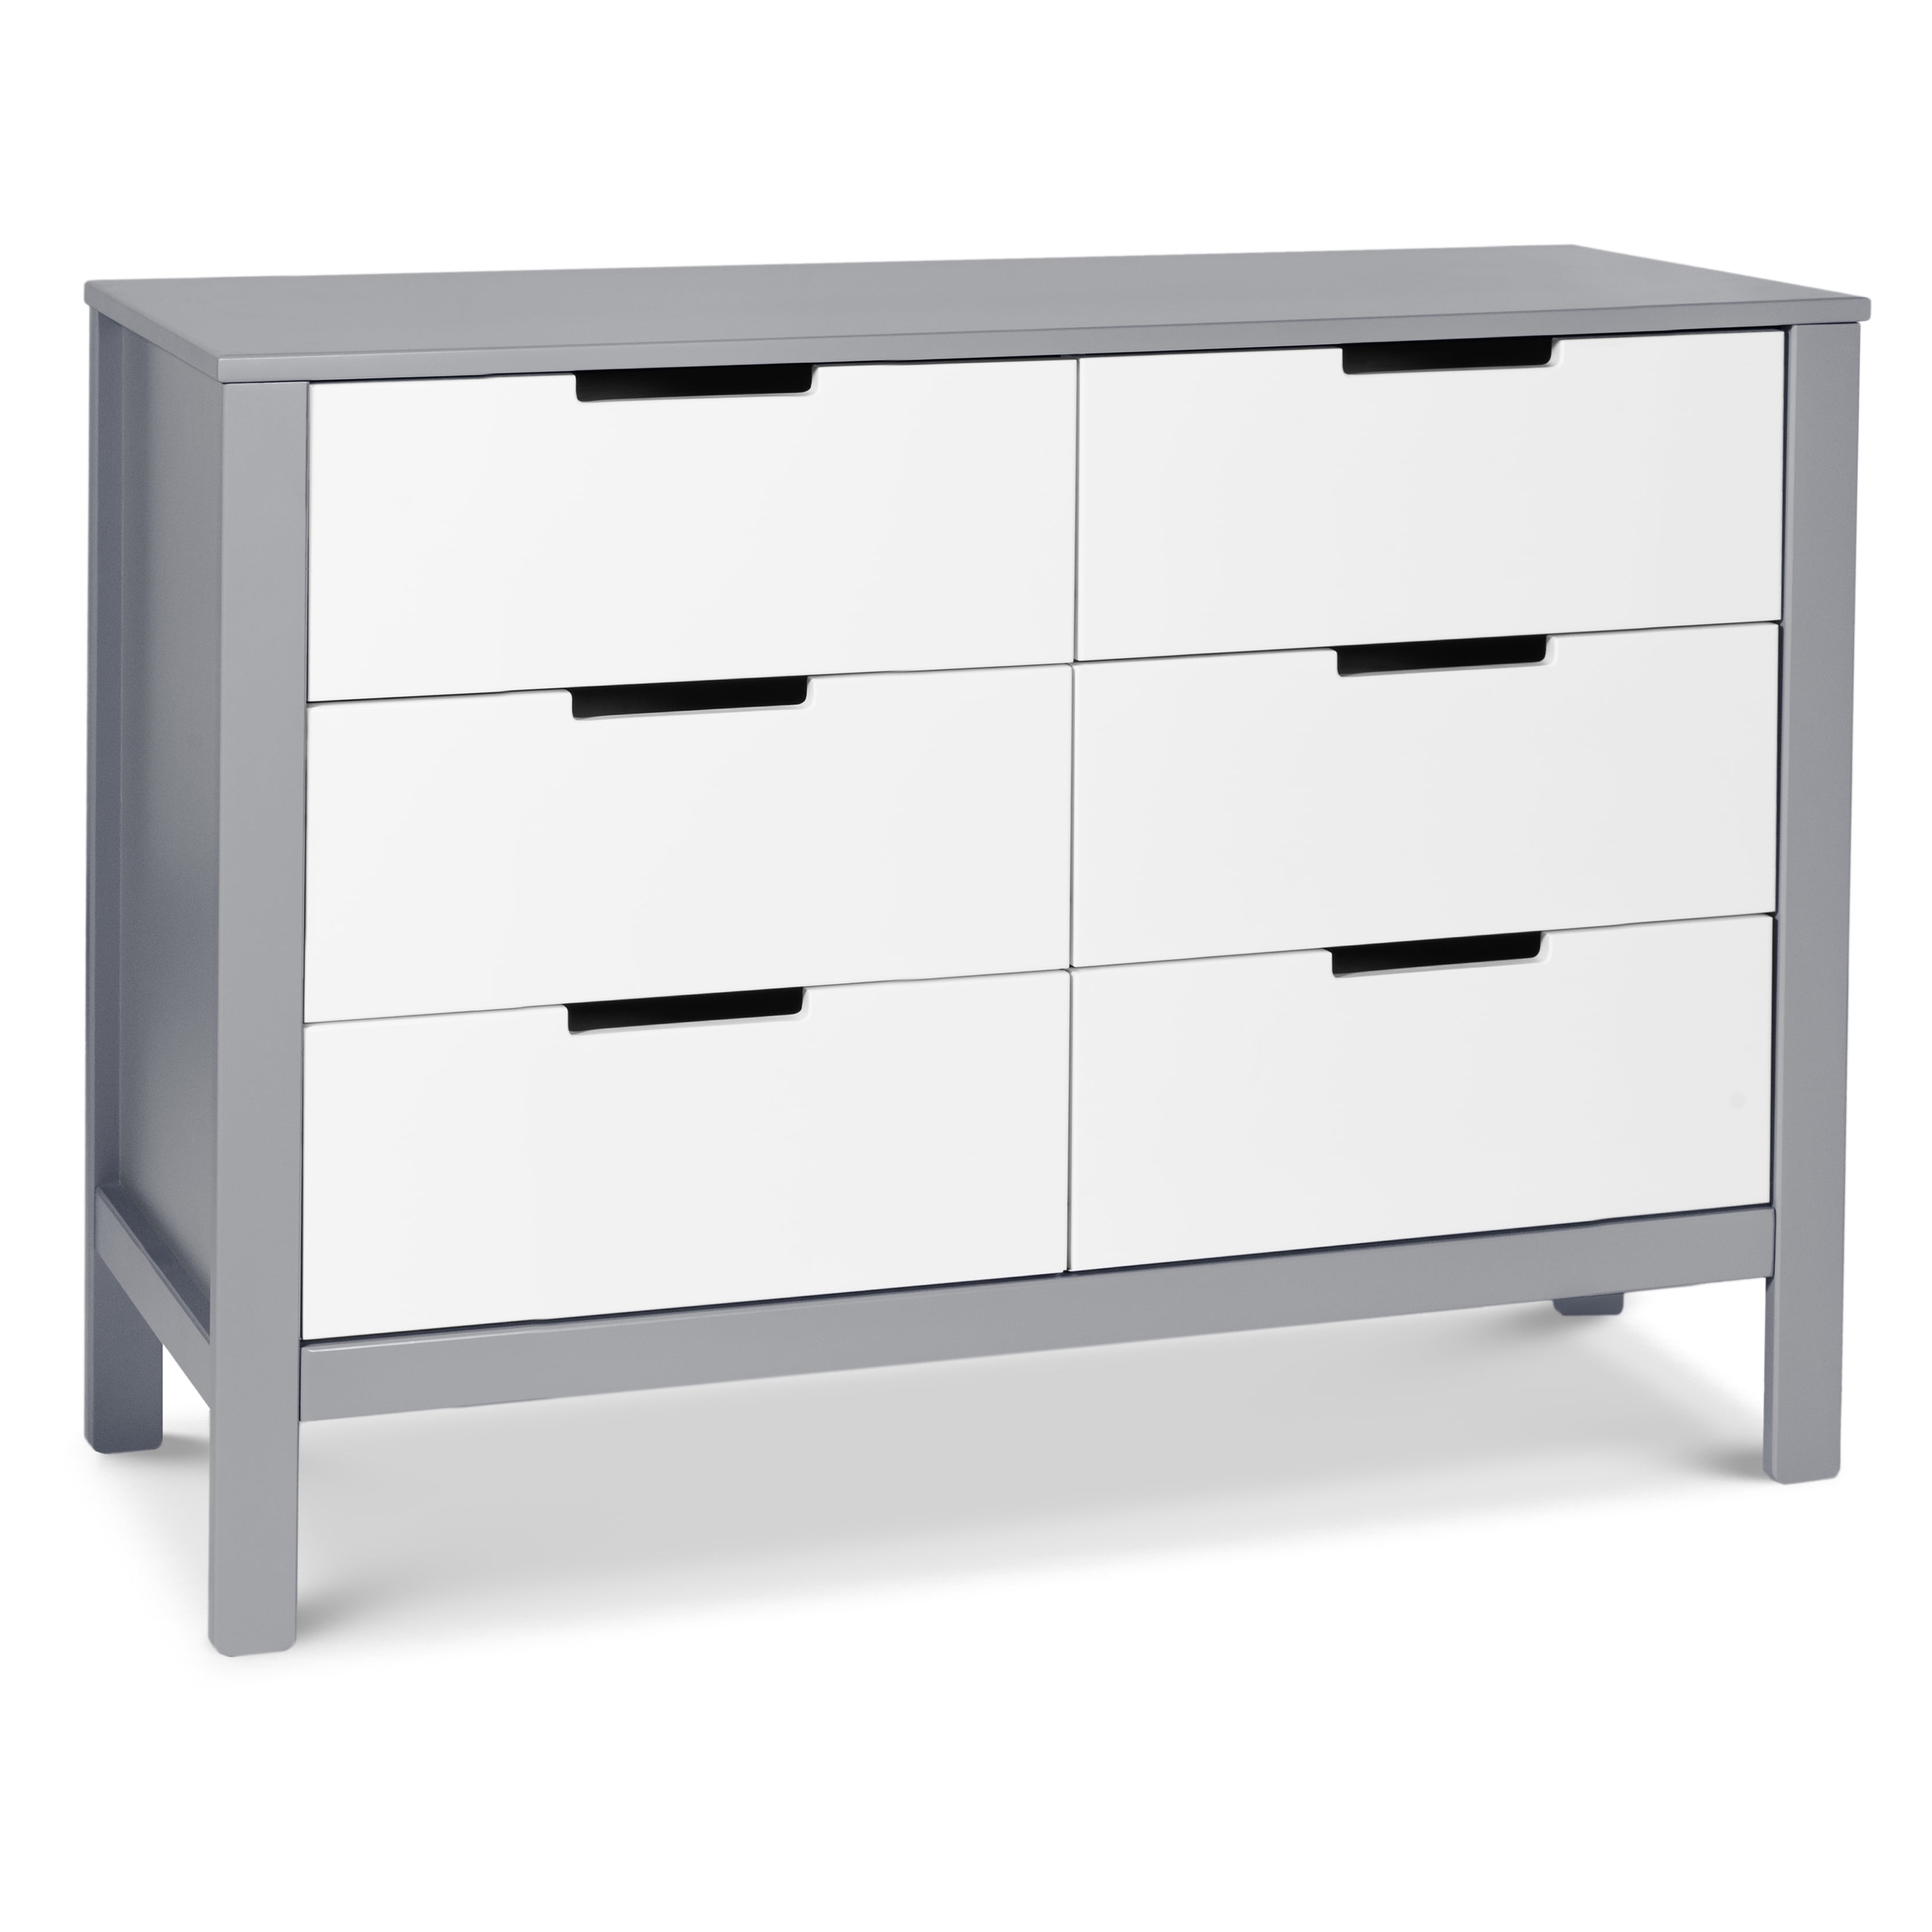 Carter S By Davinci Colby 6 Drawer Dresser In Gray And White